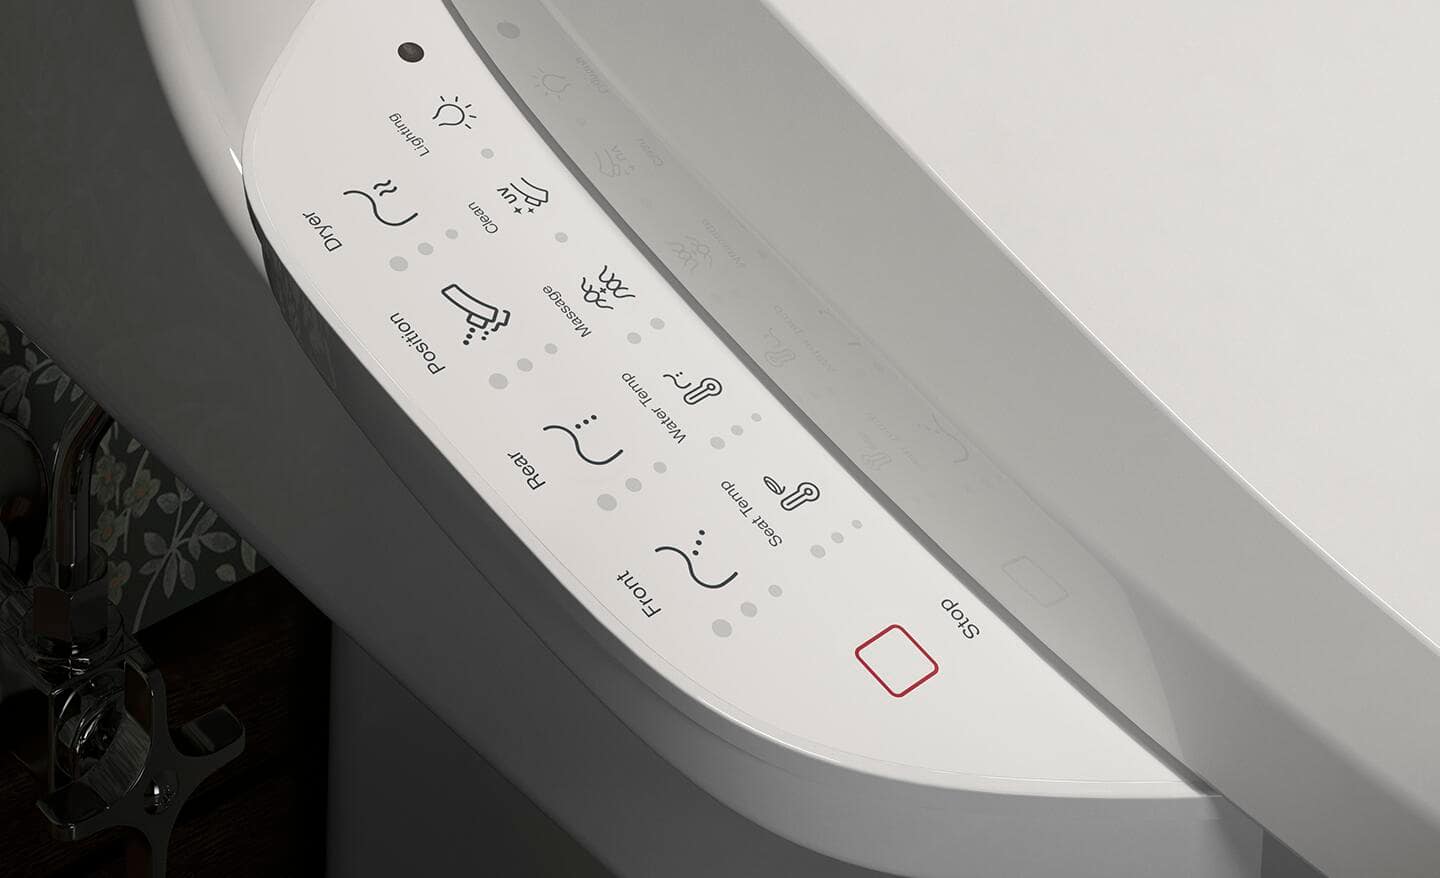 A control panel on a bidet that controls the water pressure and temperature.